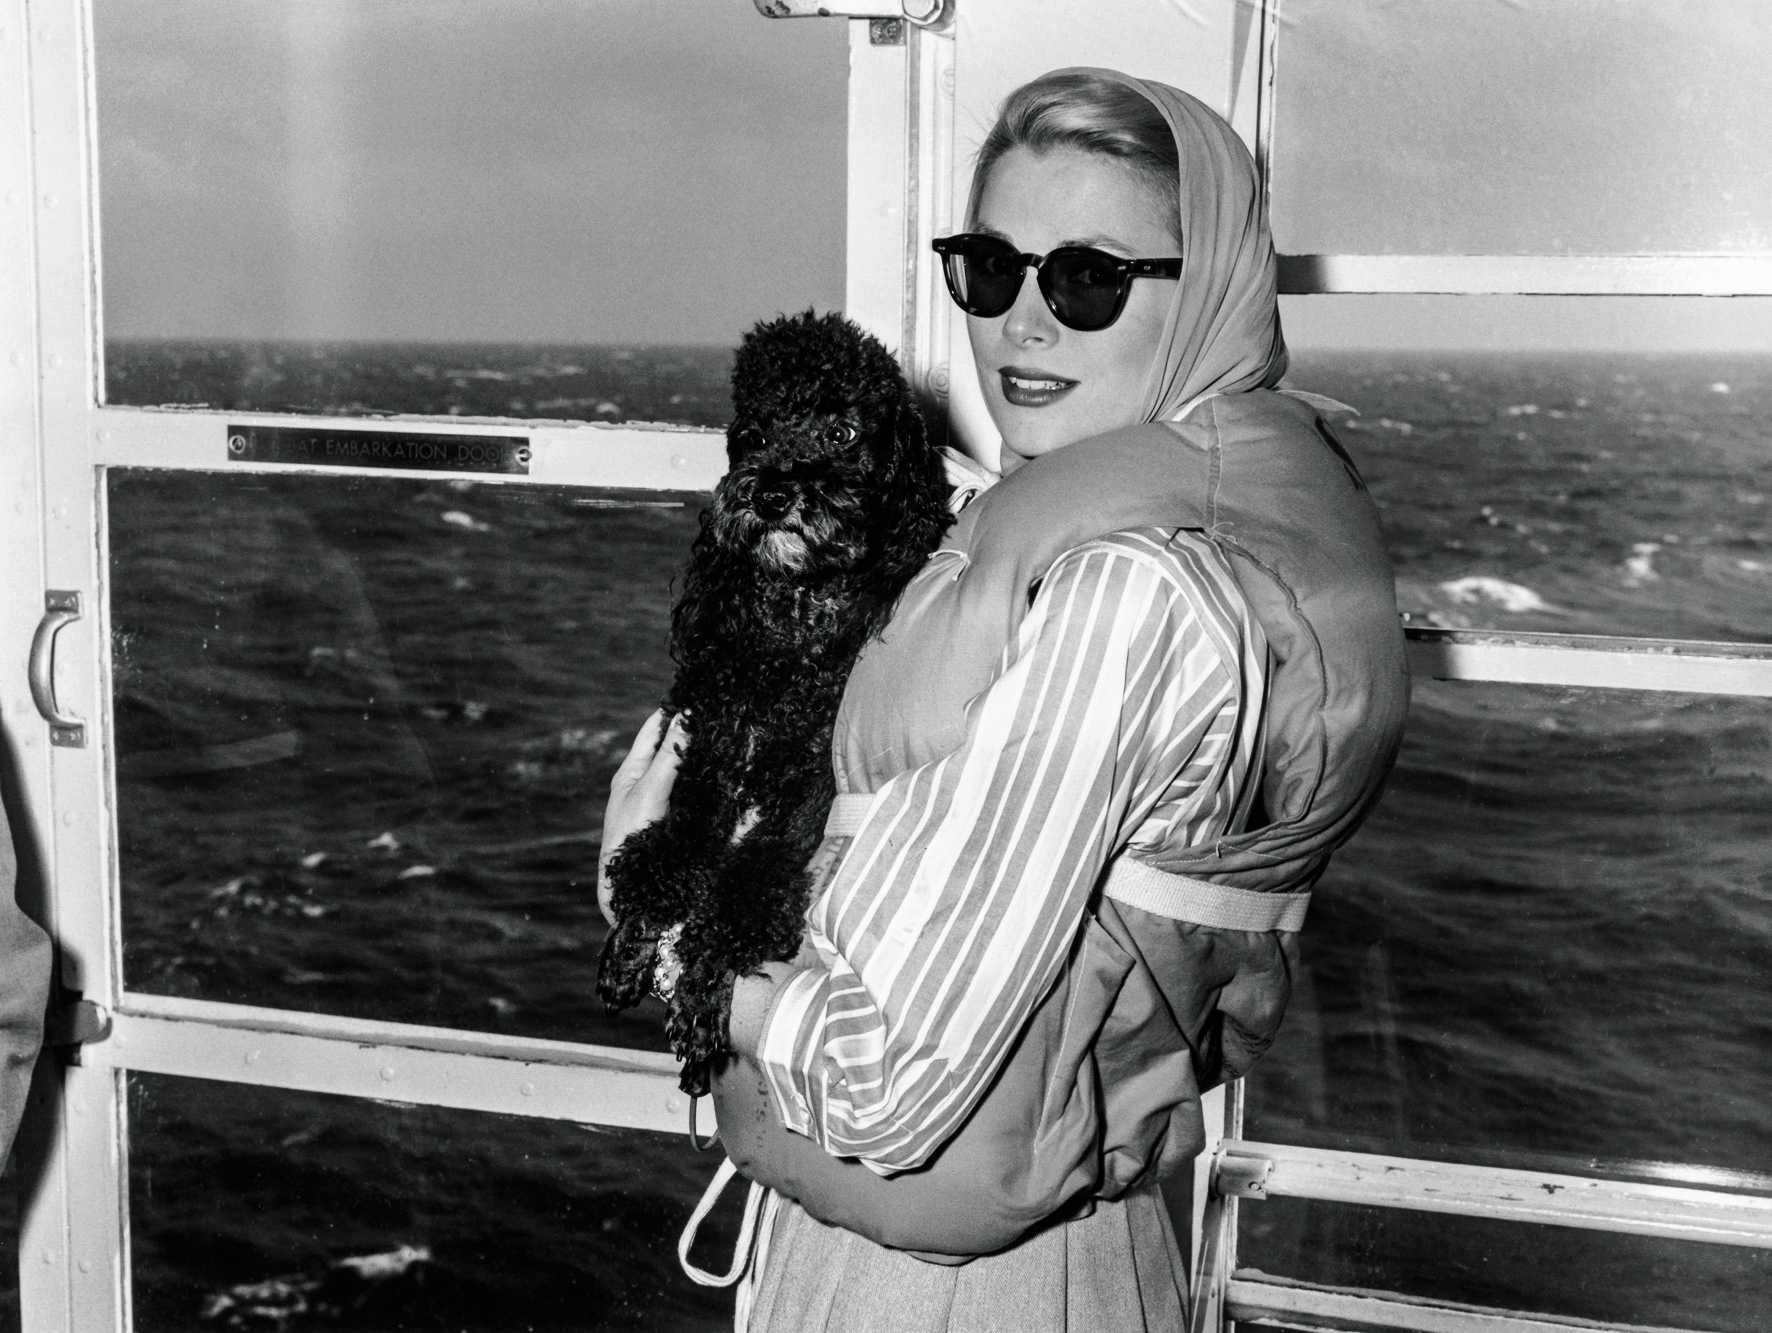   © The Stylish Life - Yachting, published by teNeues, www.teneues.com. Grace Kelly in Lifejacket, Photo © Bettmann/CORBIS.  